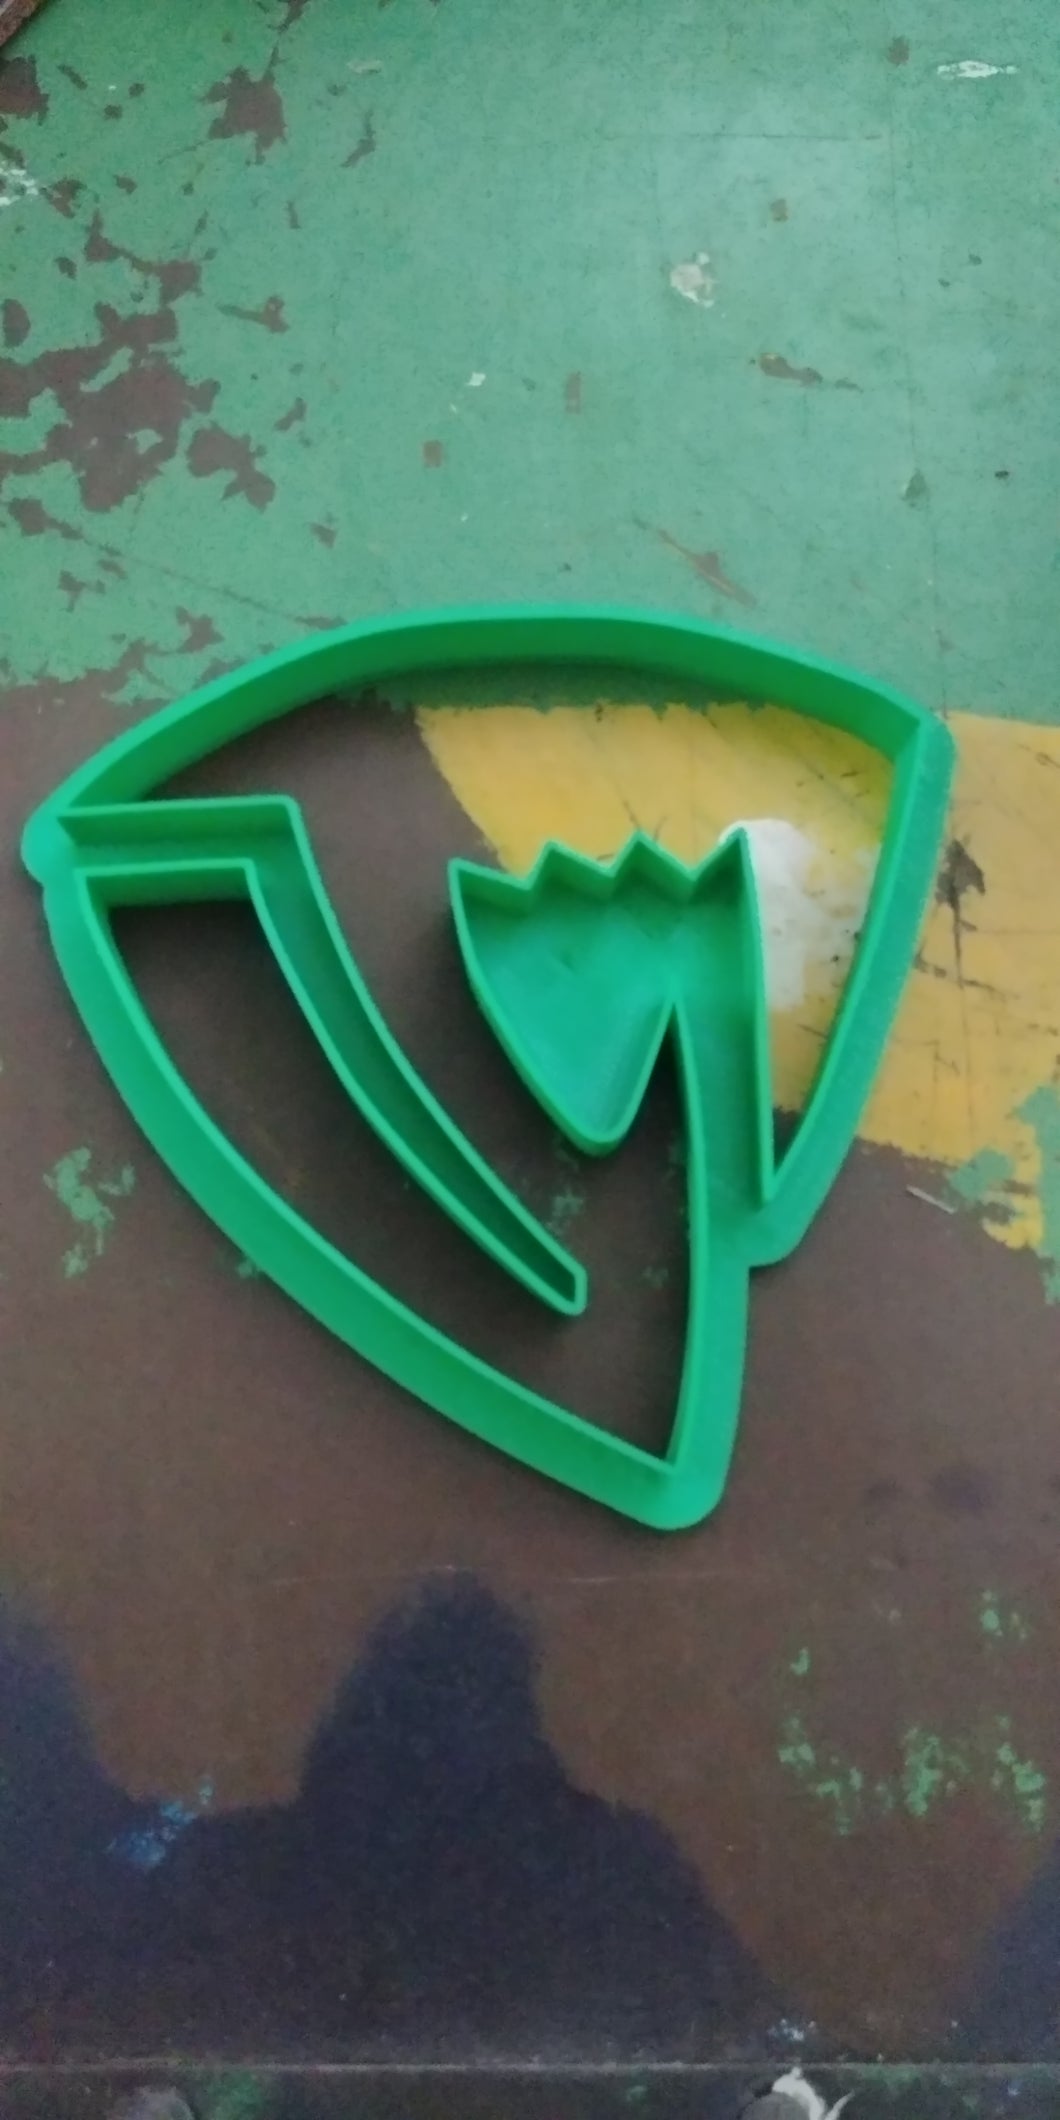 3d Printed Cookie Cutter Inspired By Fairy Tail Sabertooth Guild Crest Doughboy S Attic